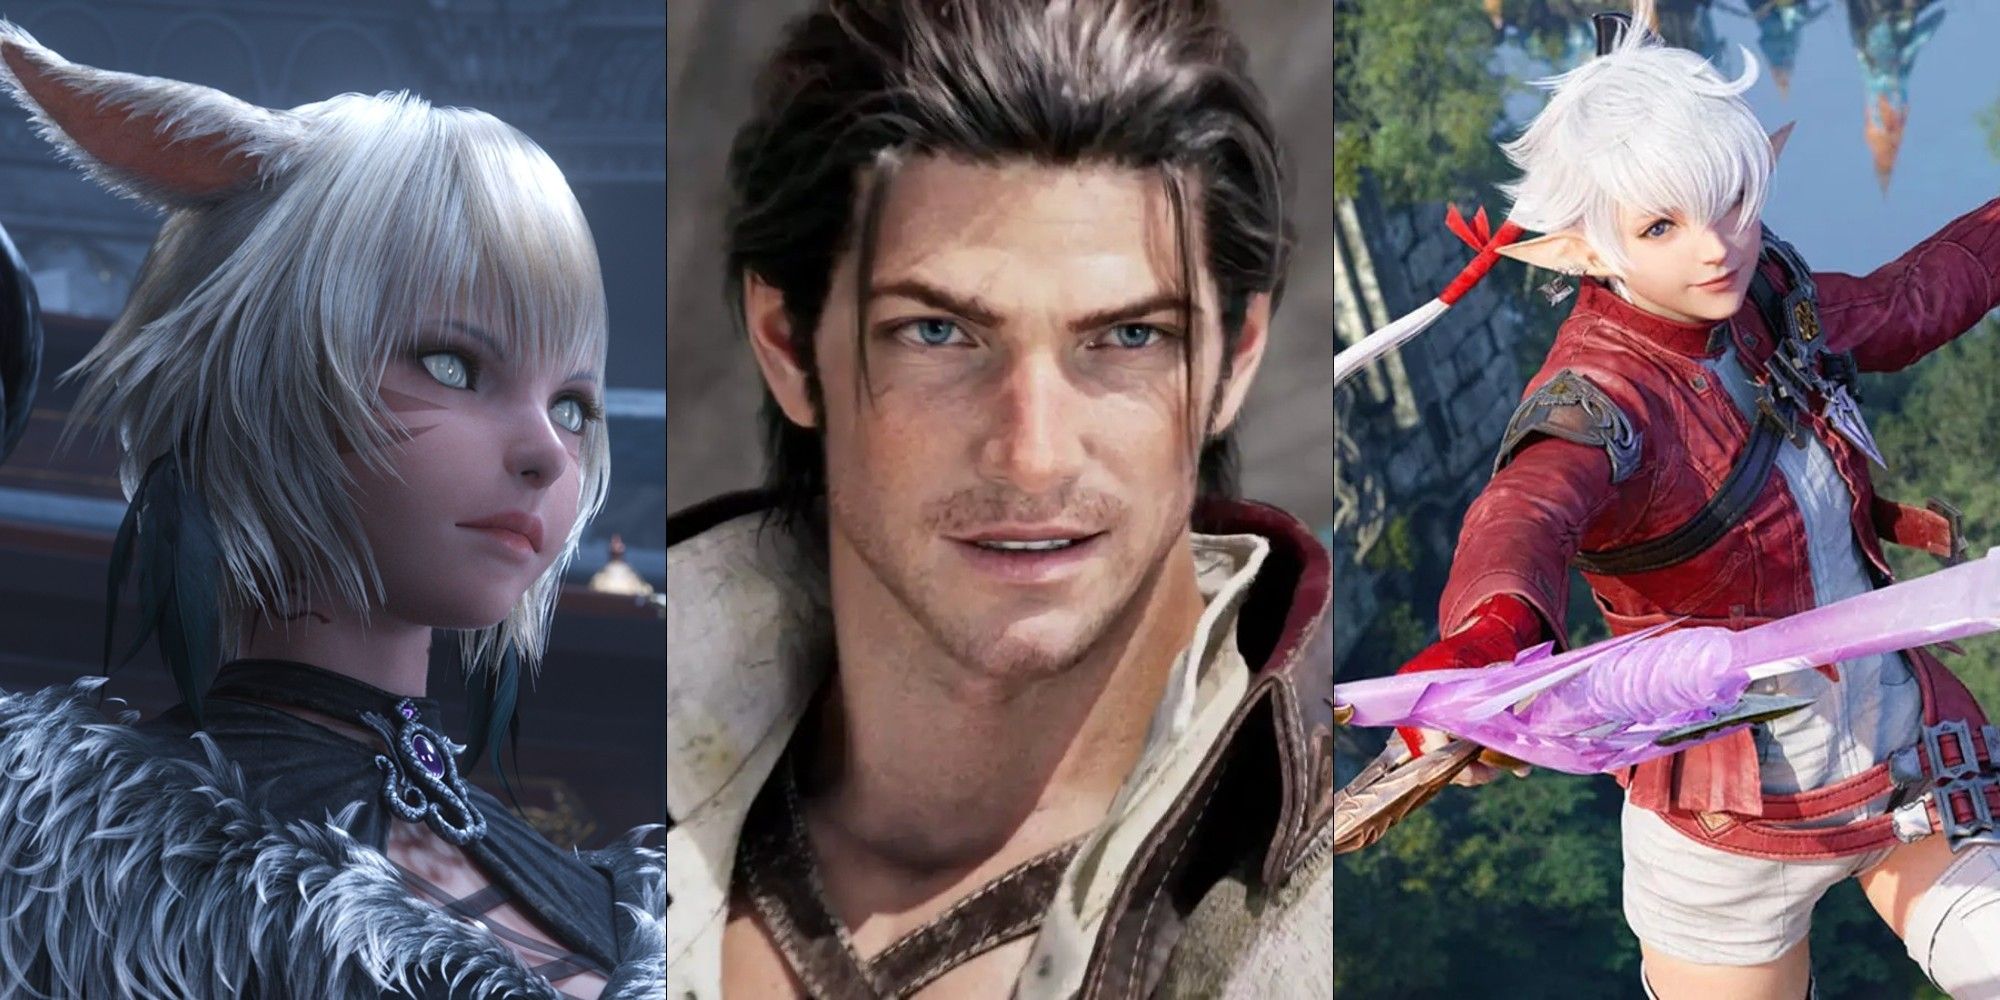 A split image featuring three characters from Final Fantasy XIV